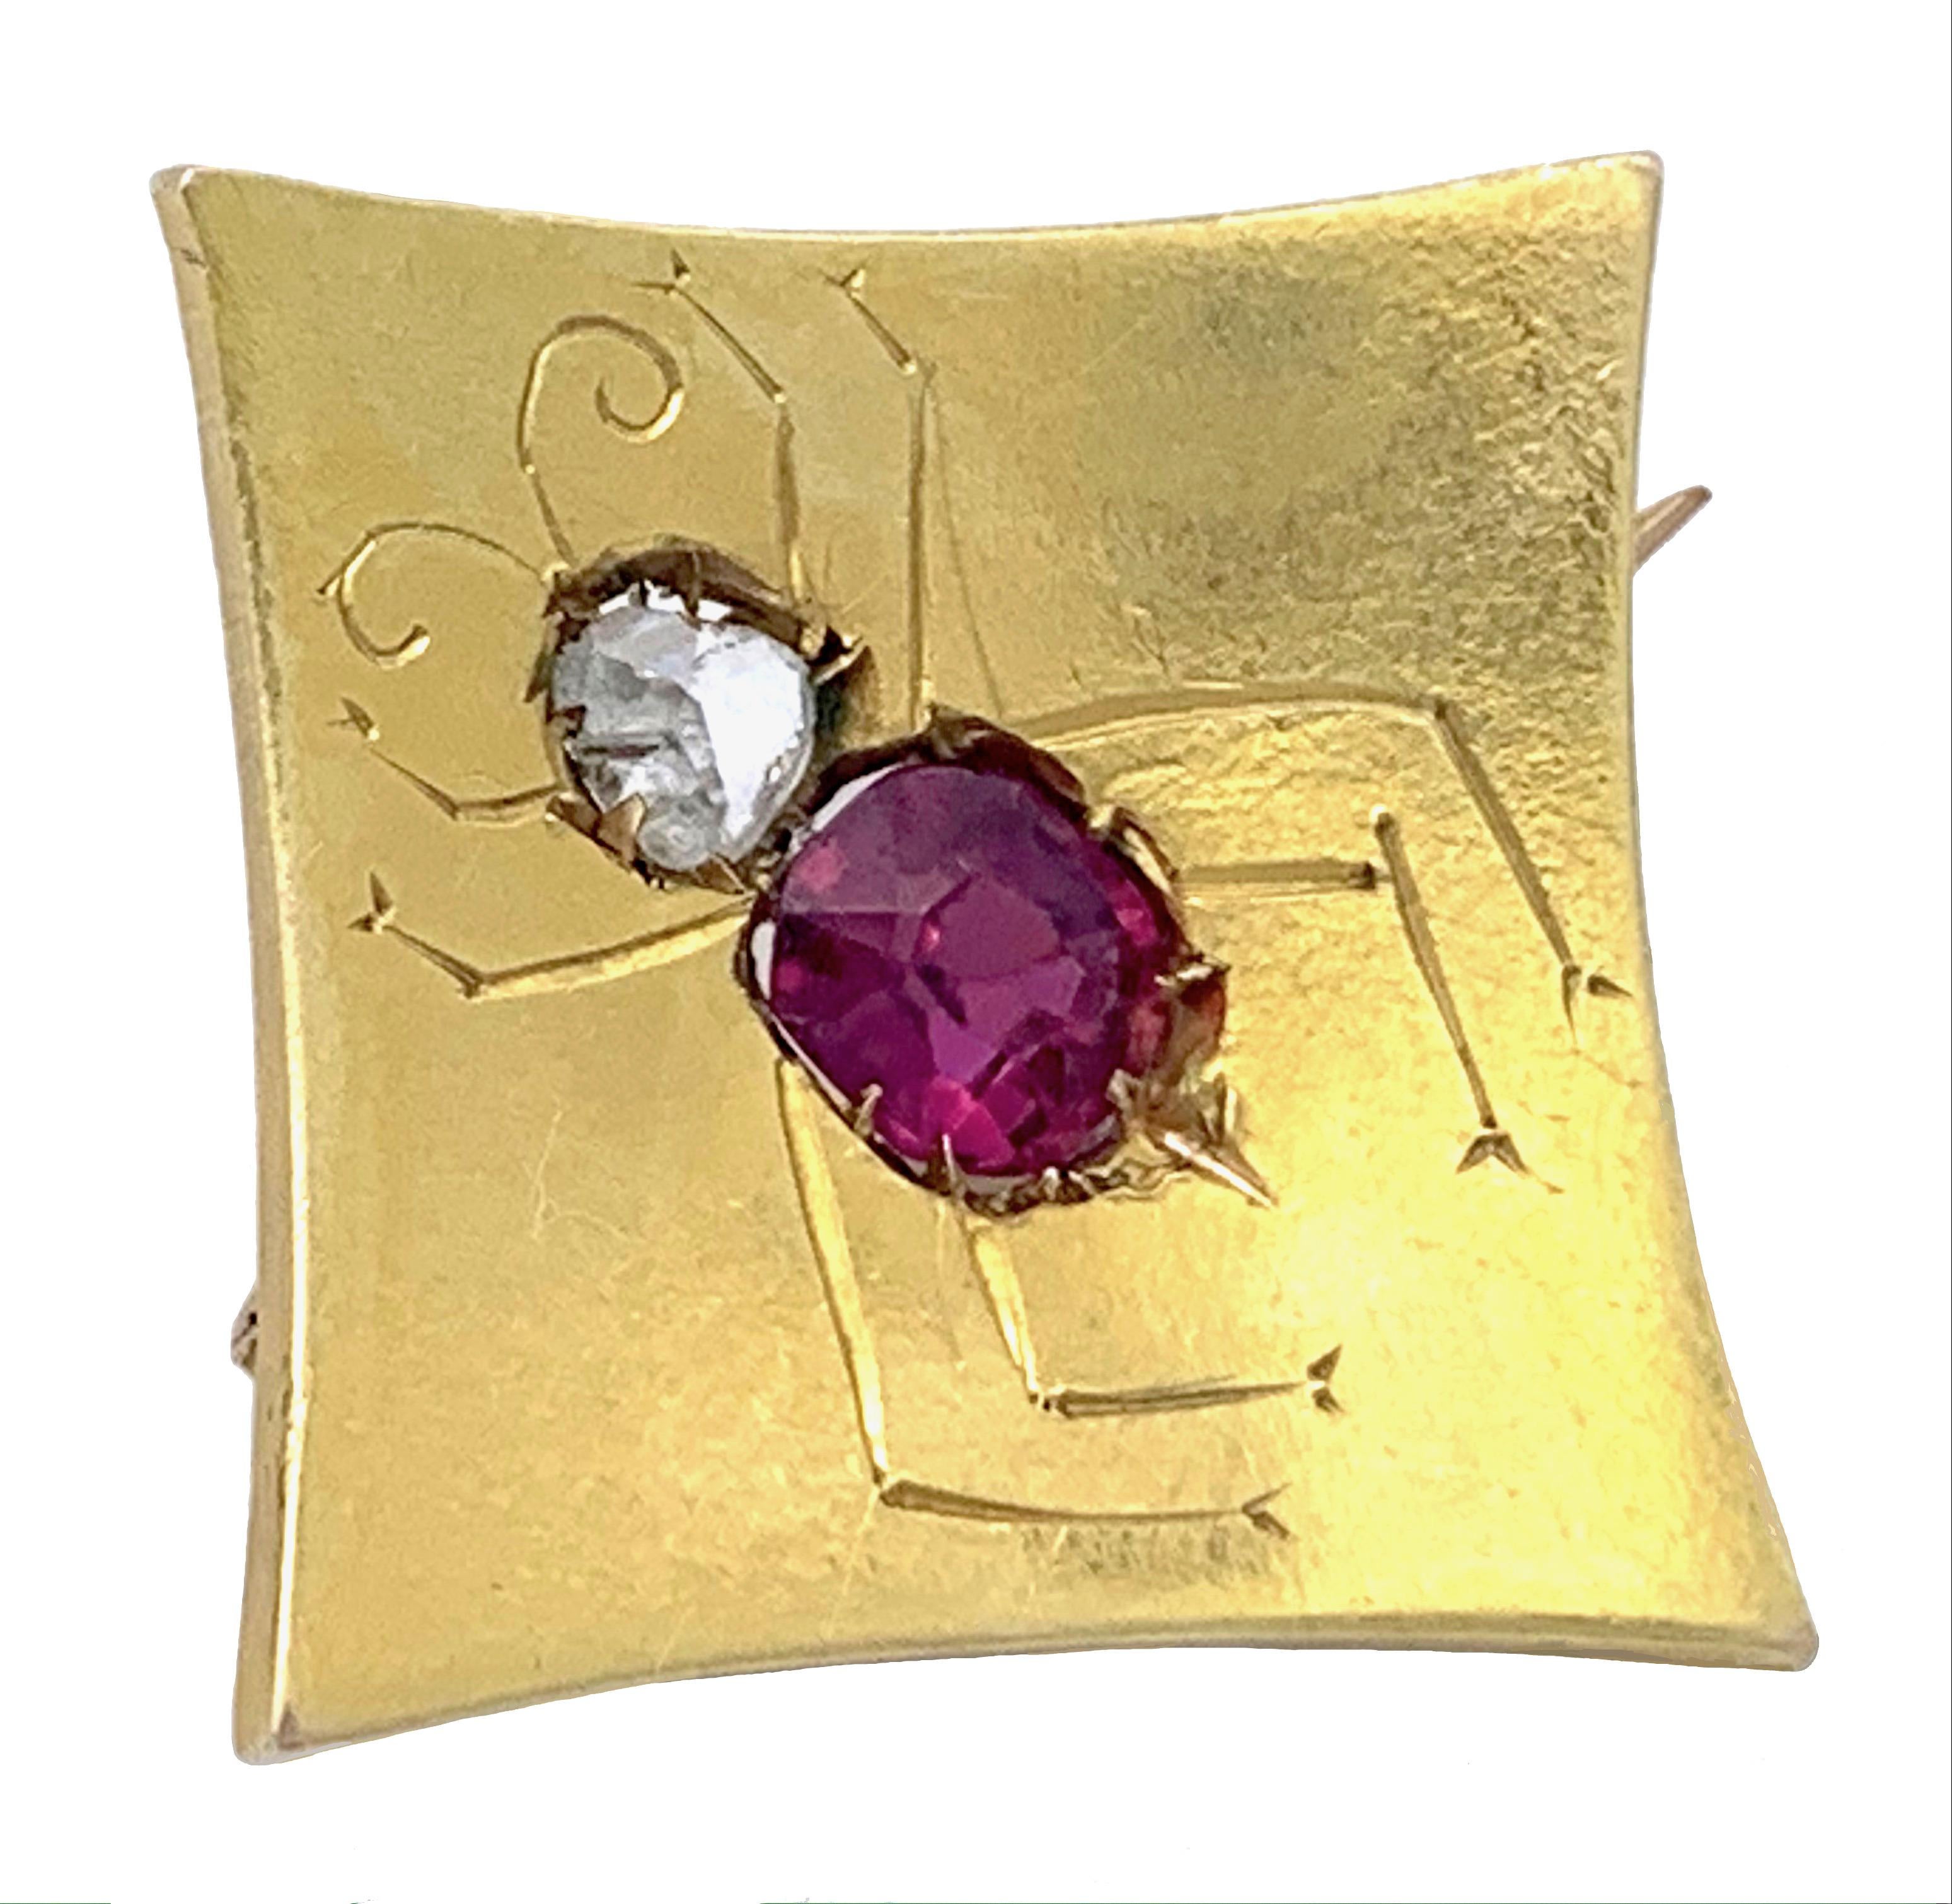 This most wonderful little jewel features a finely engraved spider, with an old cut diamond as it's head and a ruby of aproximately 0.60 carats as it's body.
